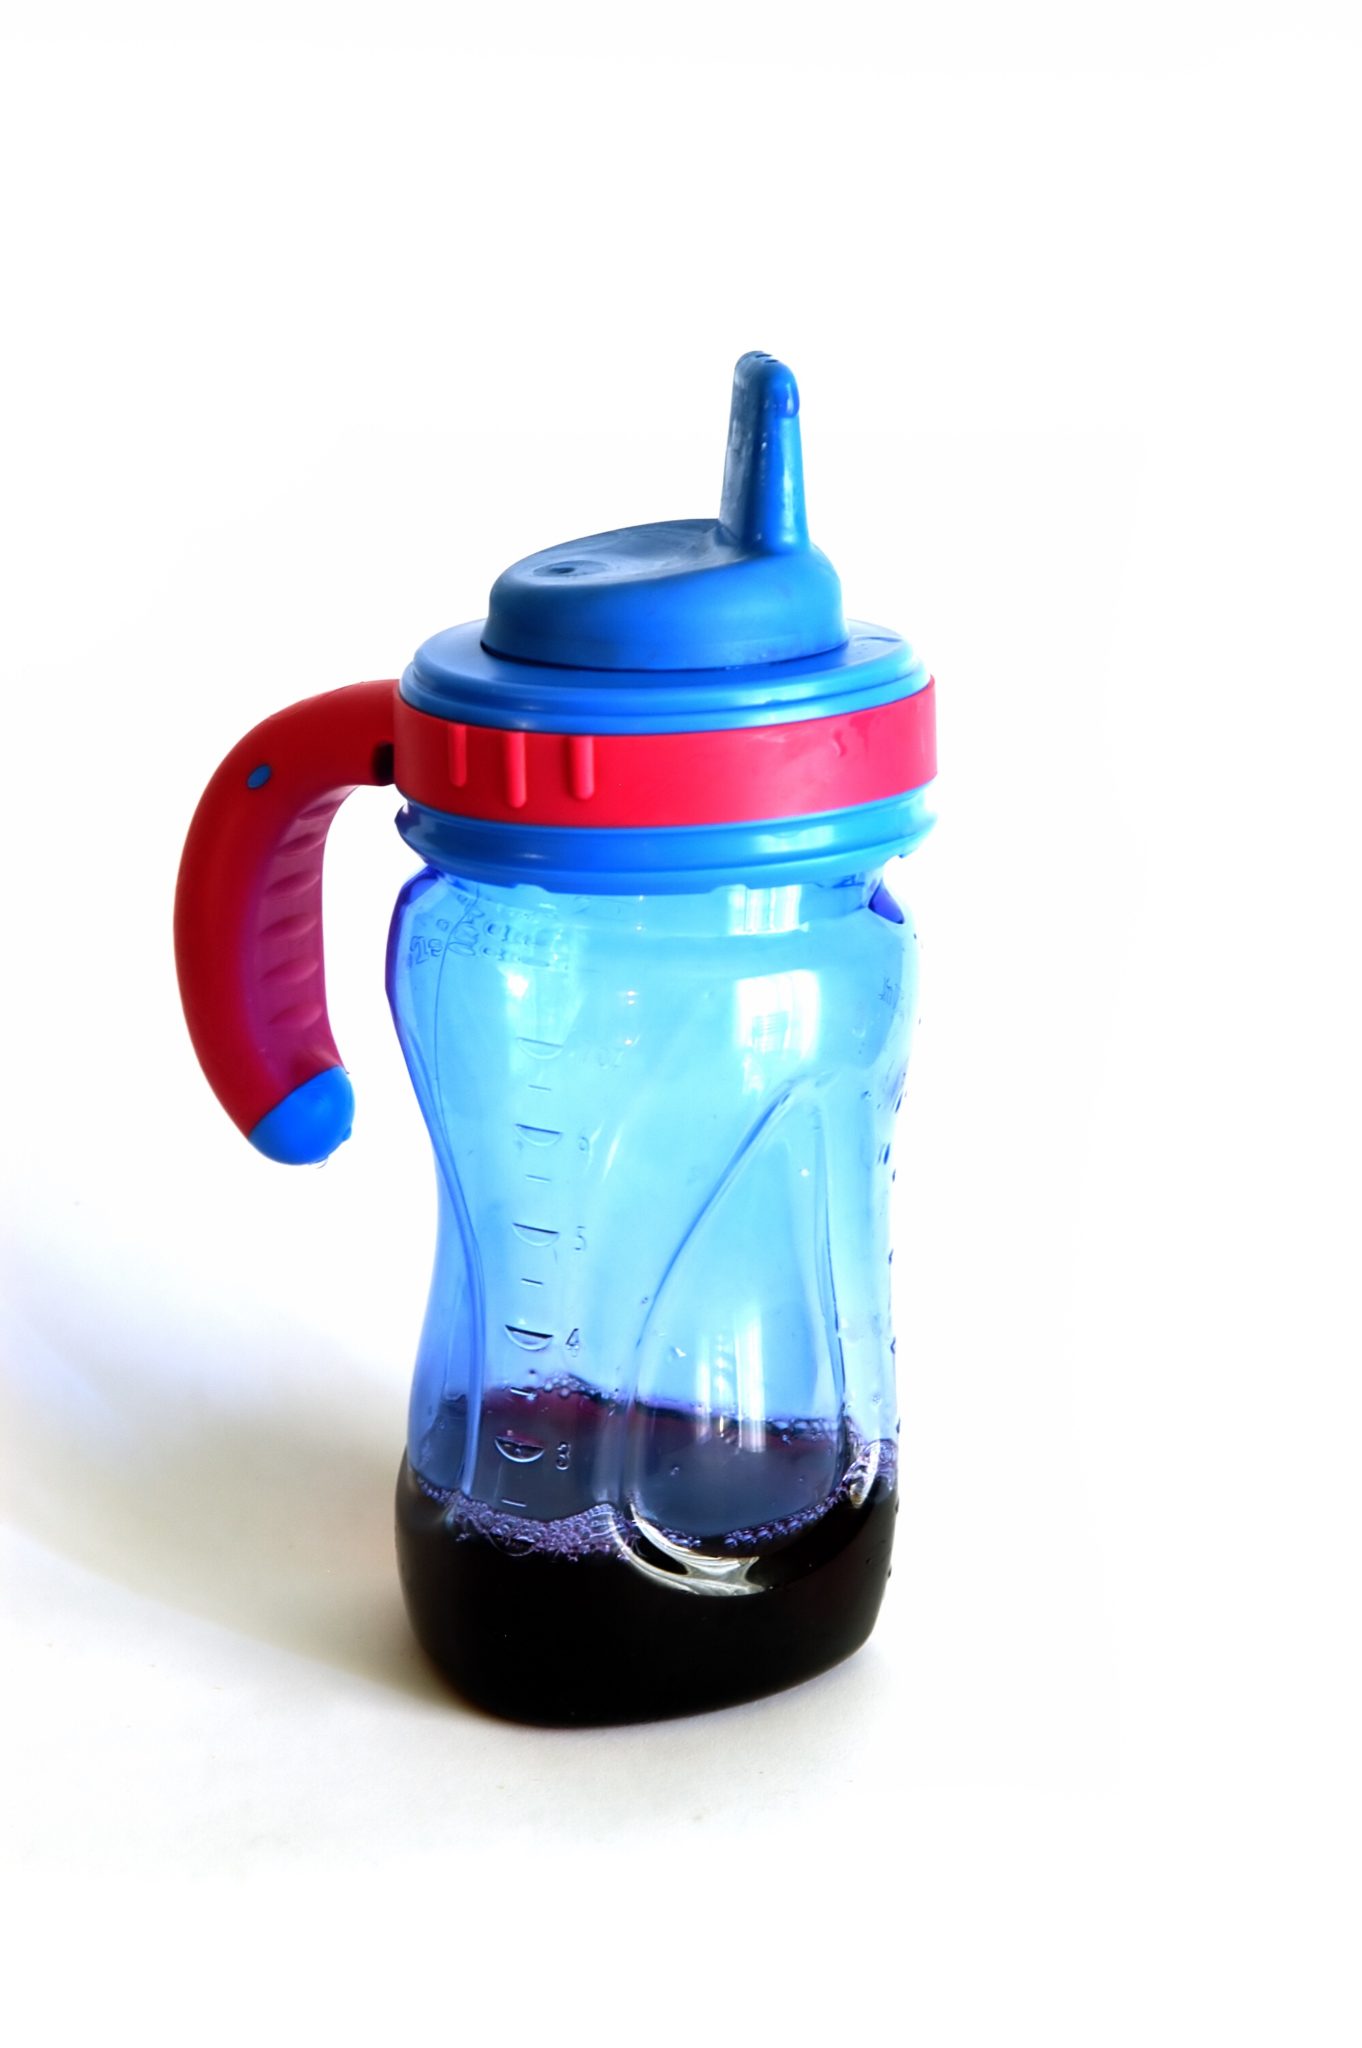 Sippy cup.